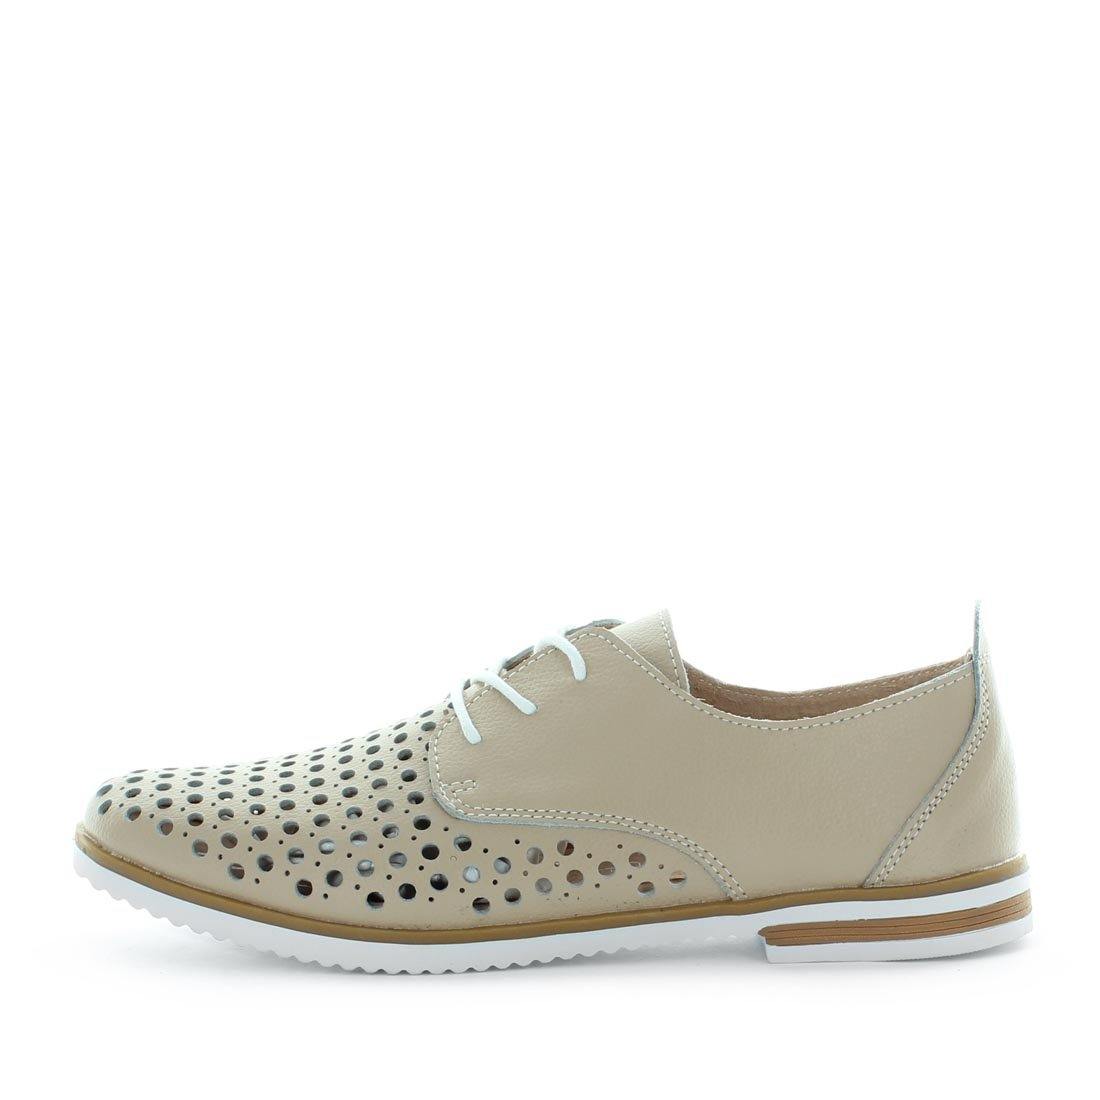 CABITA - Just Bee - Just Bee Comfort - women's leather shoes, women's leather flats, comfort shoe, comfortable womens shoes, womens shoes, laser cut leather, womens lace up shoes, quality leather shoes, comfort for all day wear, flexible outsole, flexible shoes, womens flexible shoes (6592208044111)